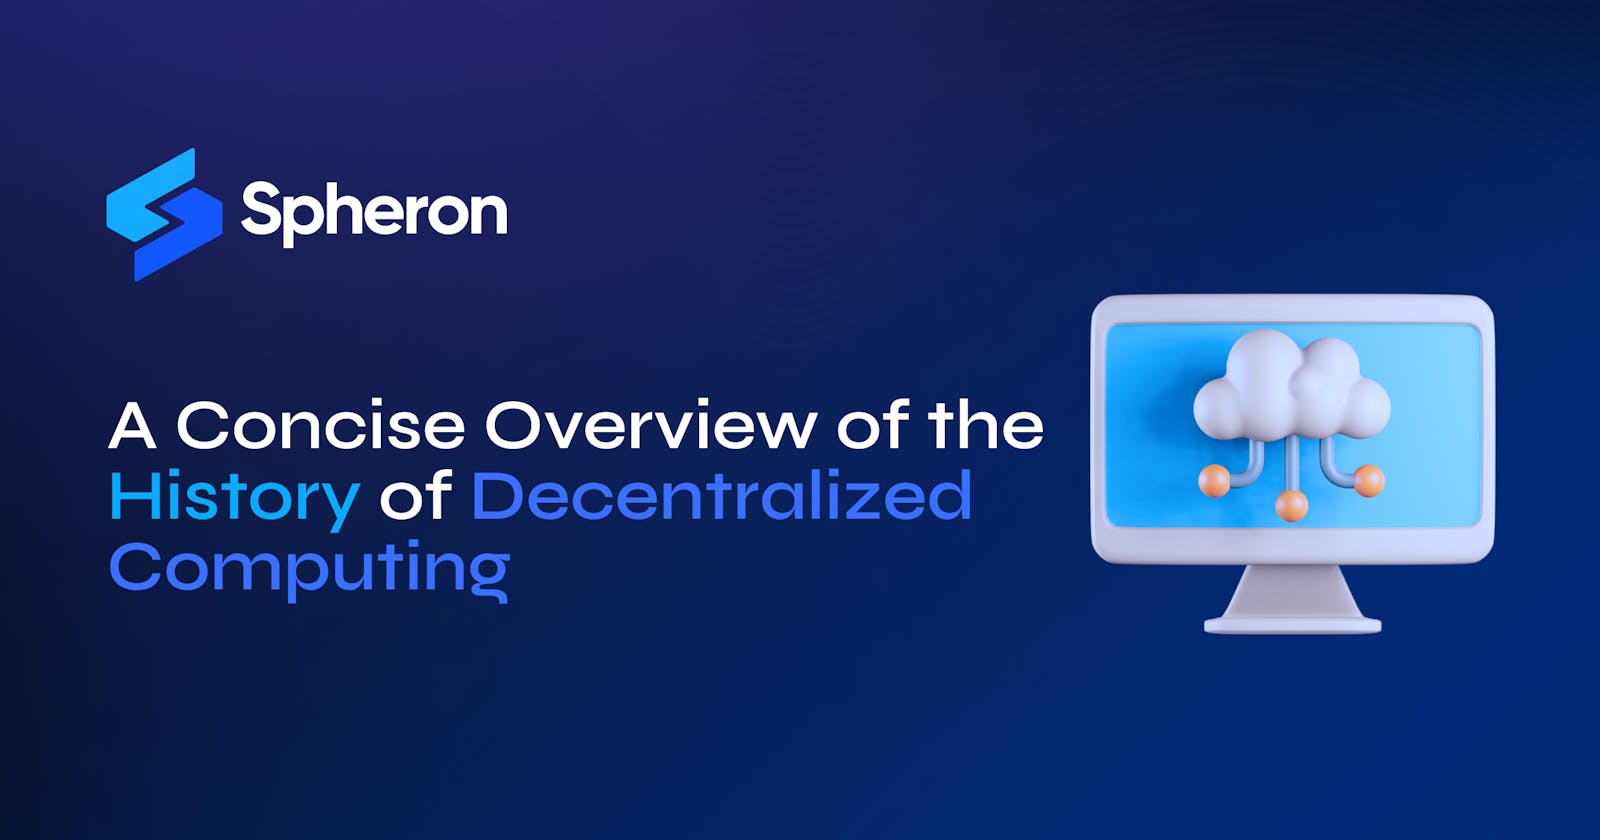 A Concise Overview of the History of Decentralized Computing